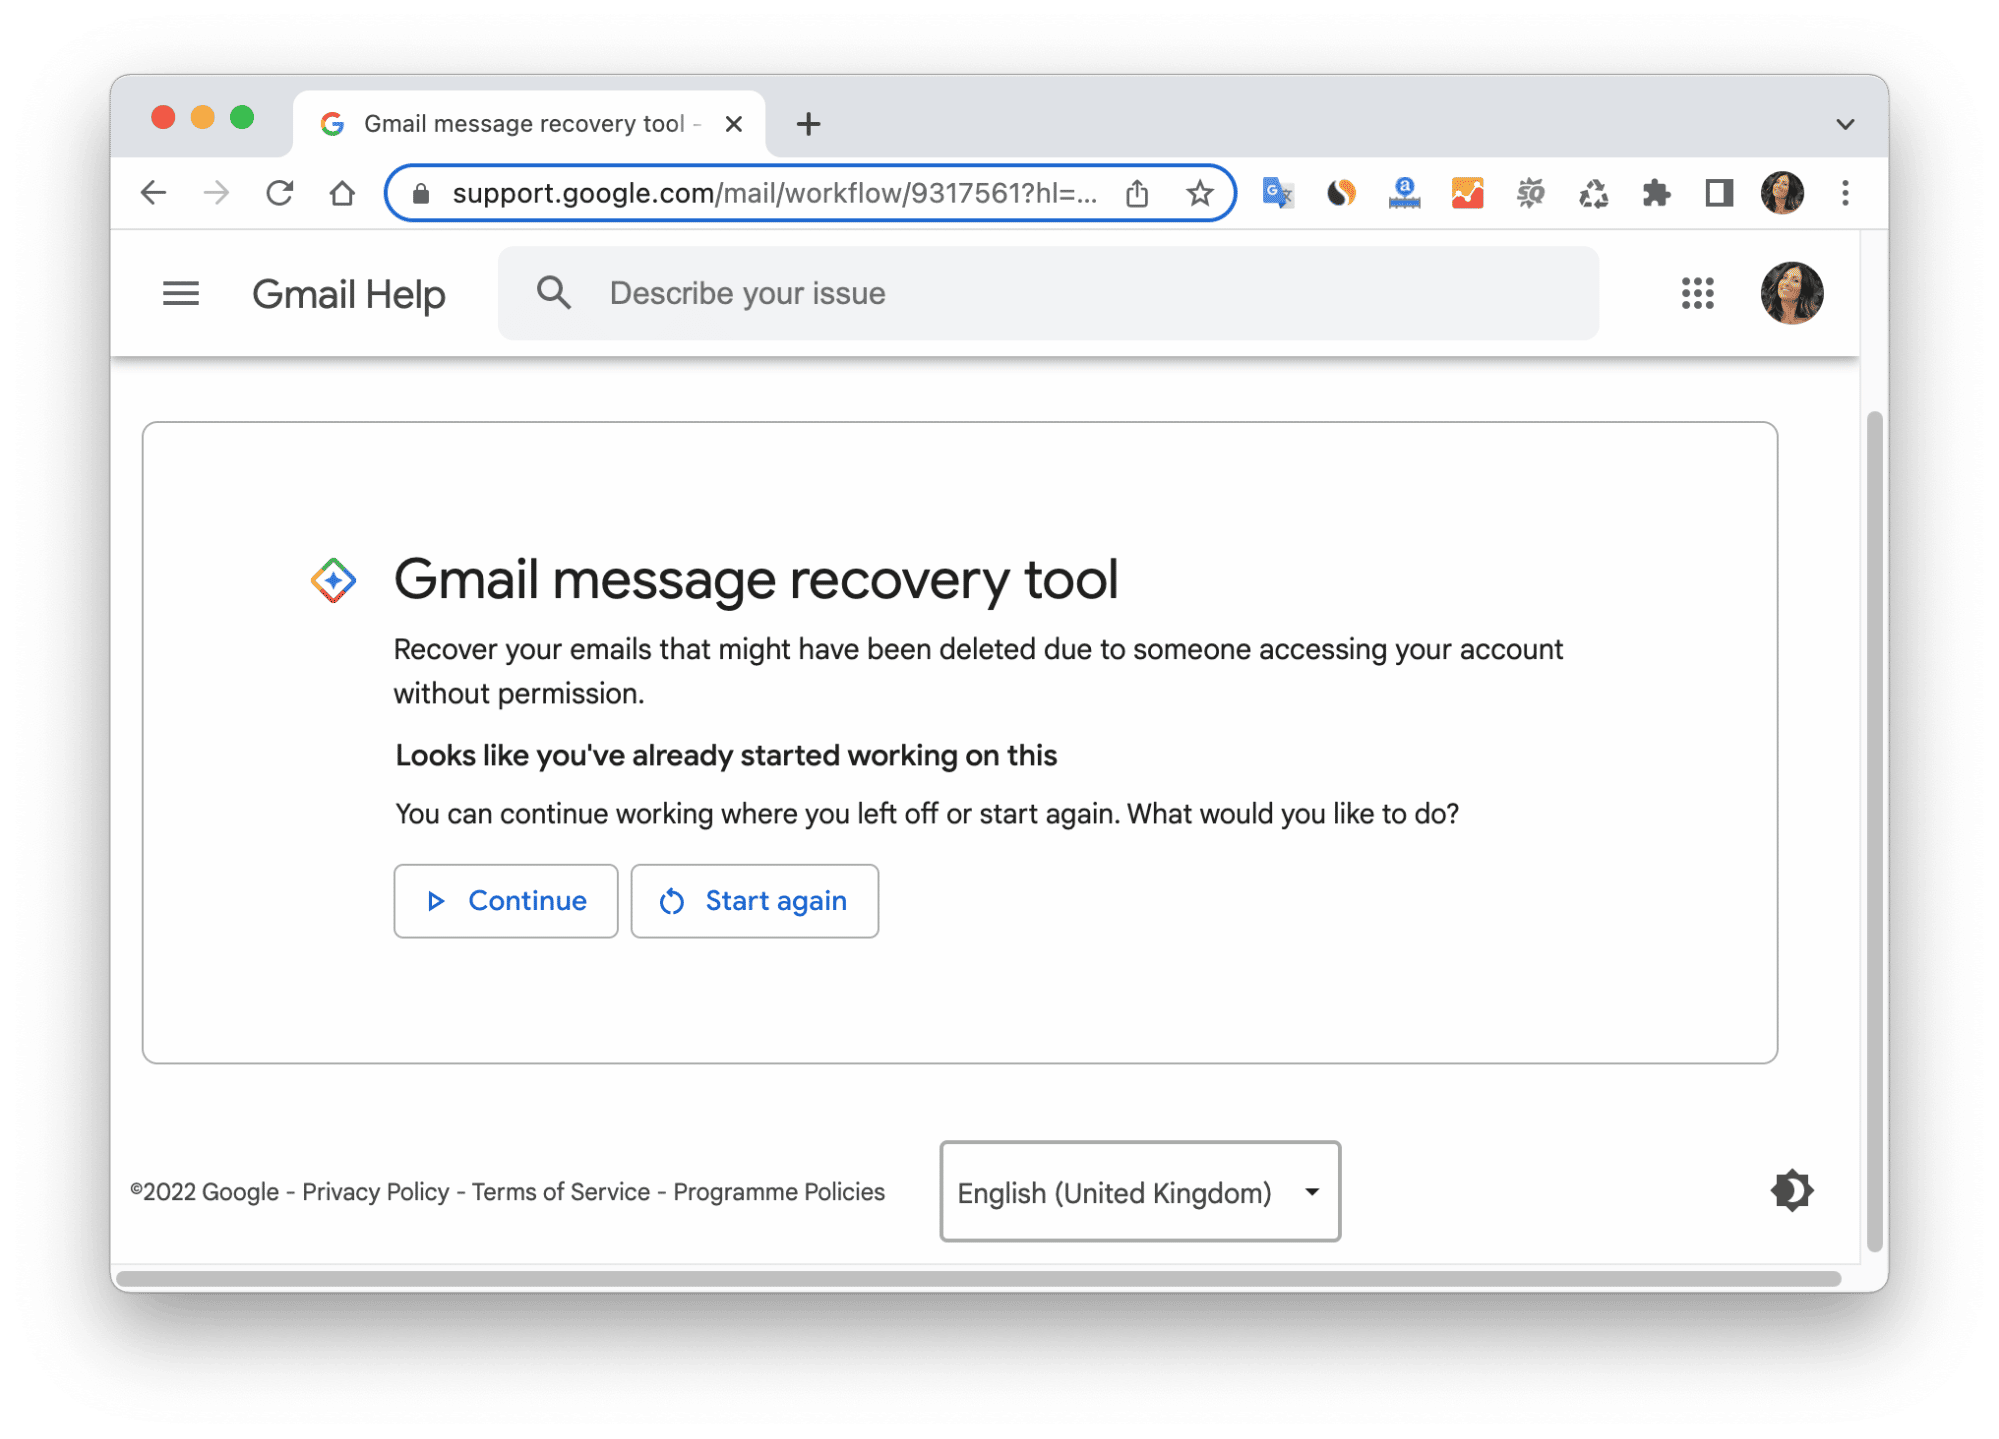 Gmail message recovery tool page